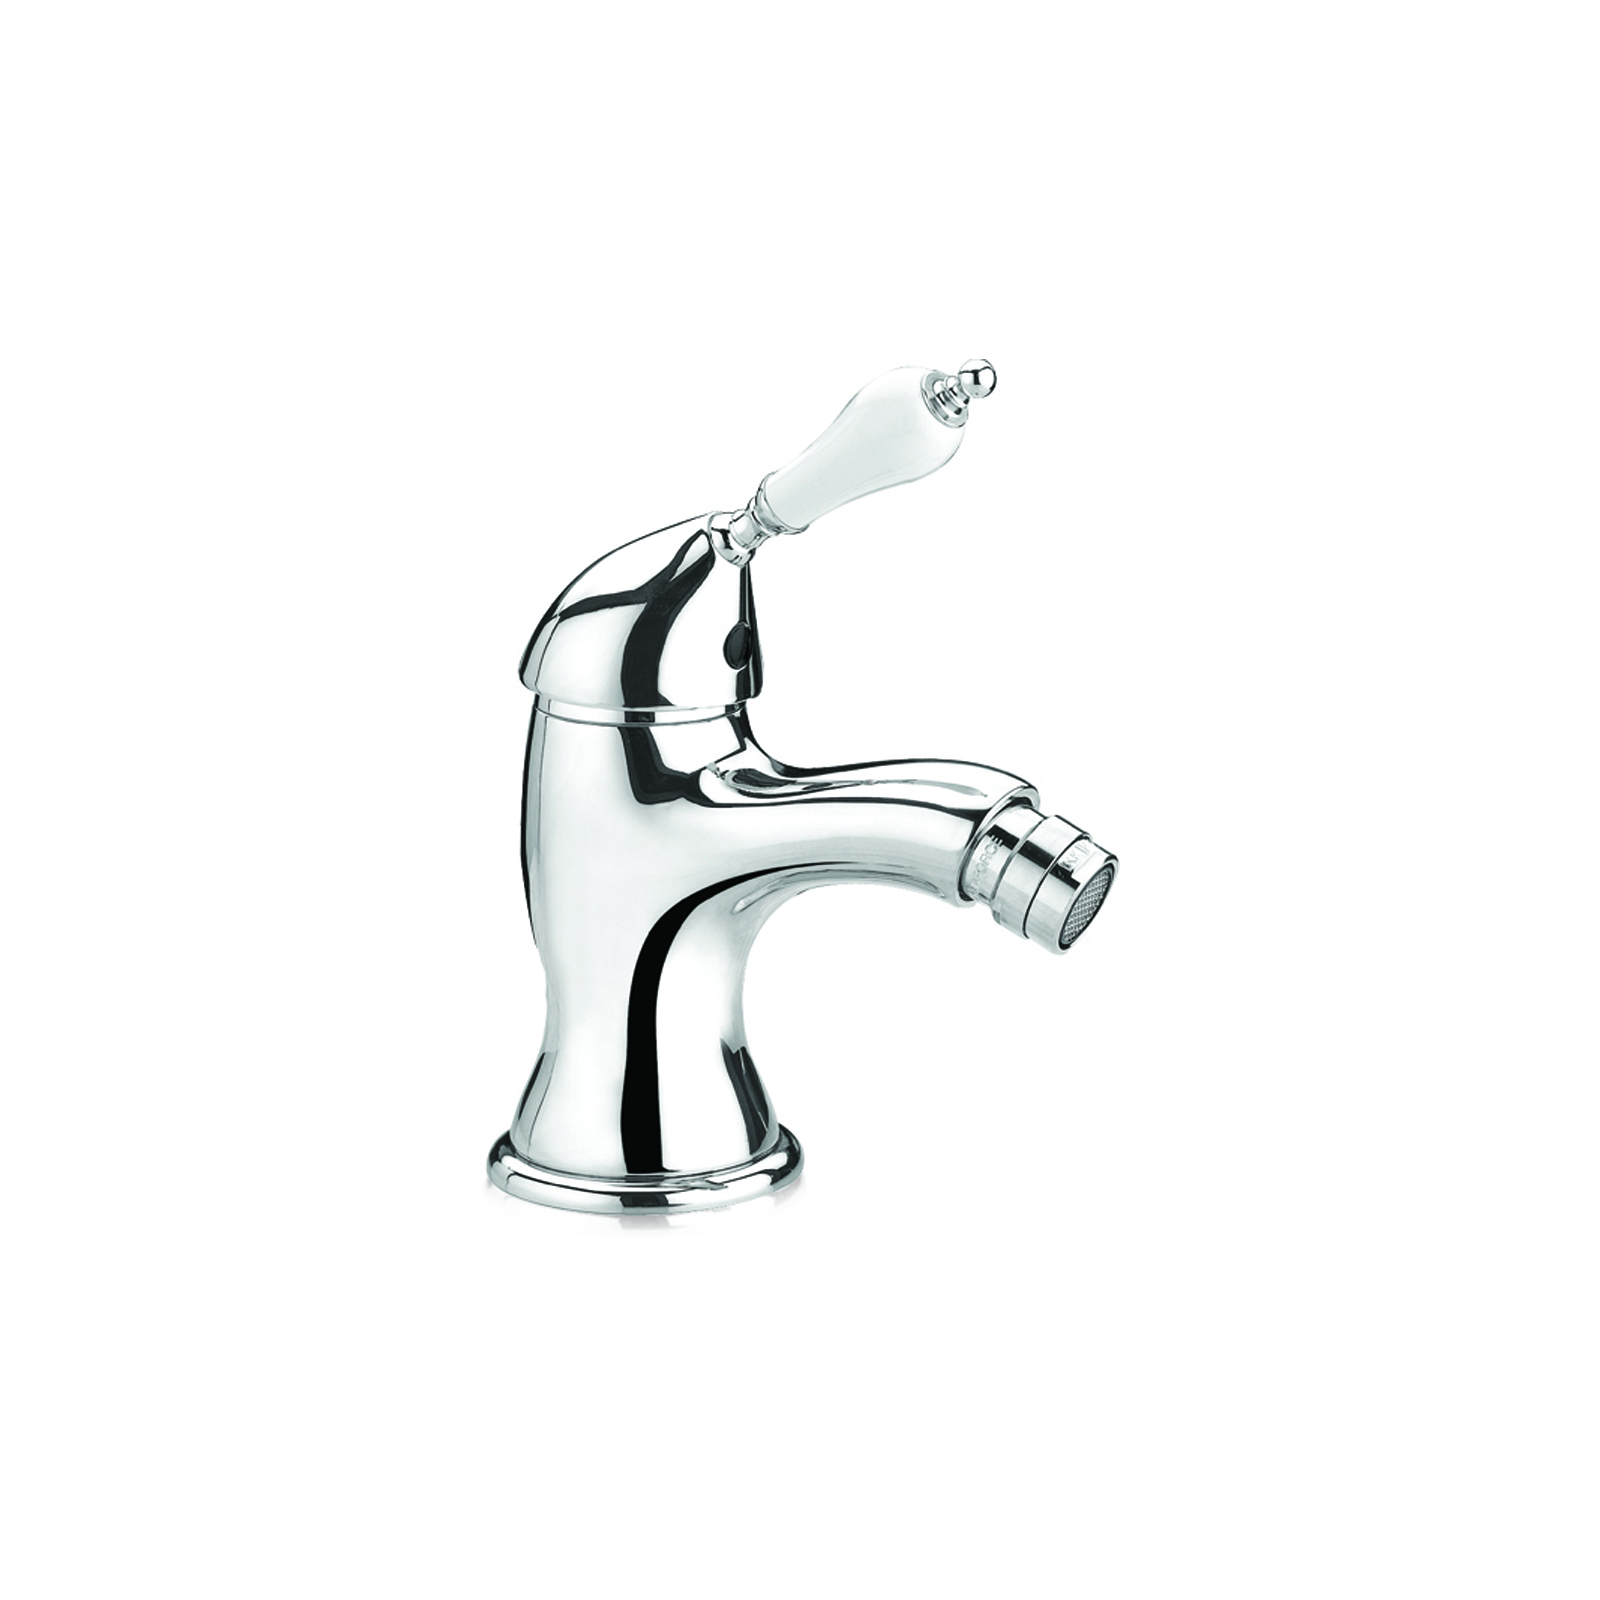 Bidet faucet with pop-up waste